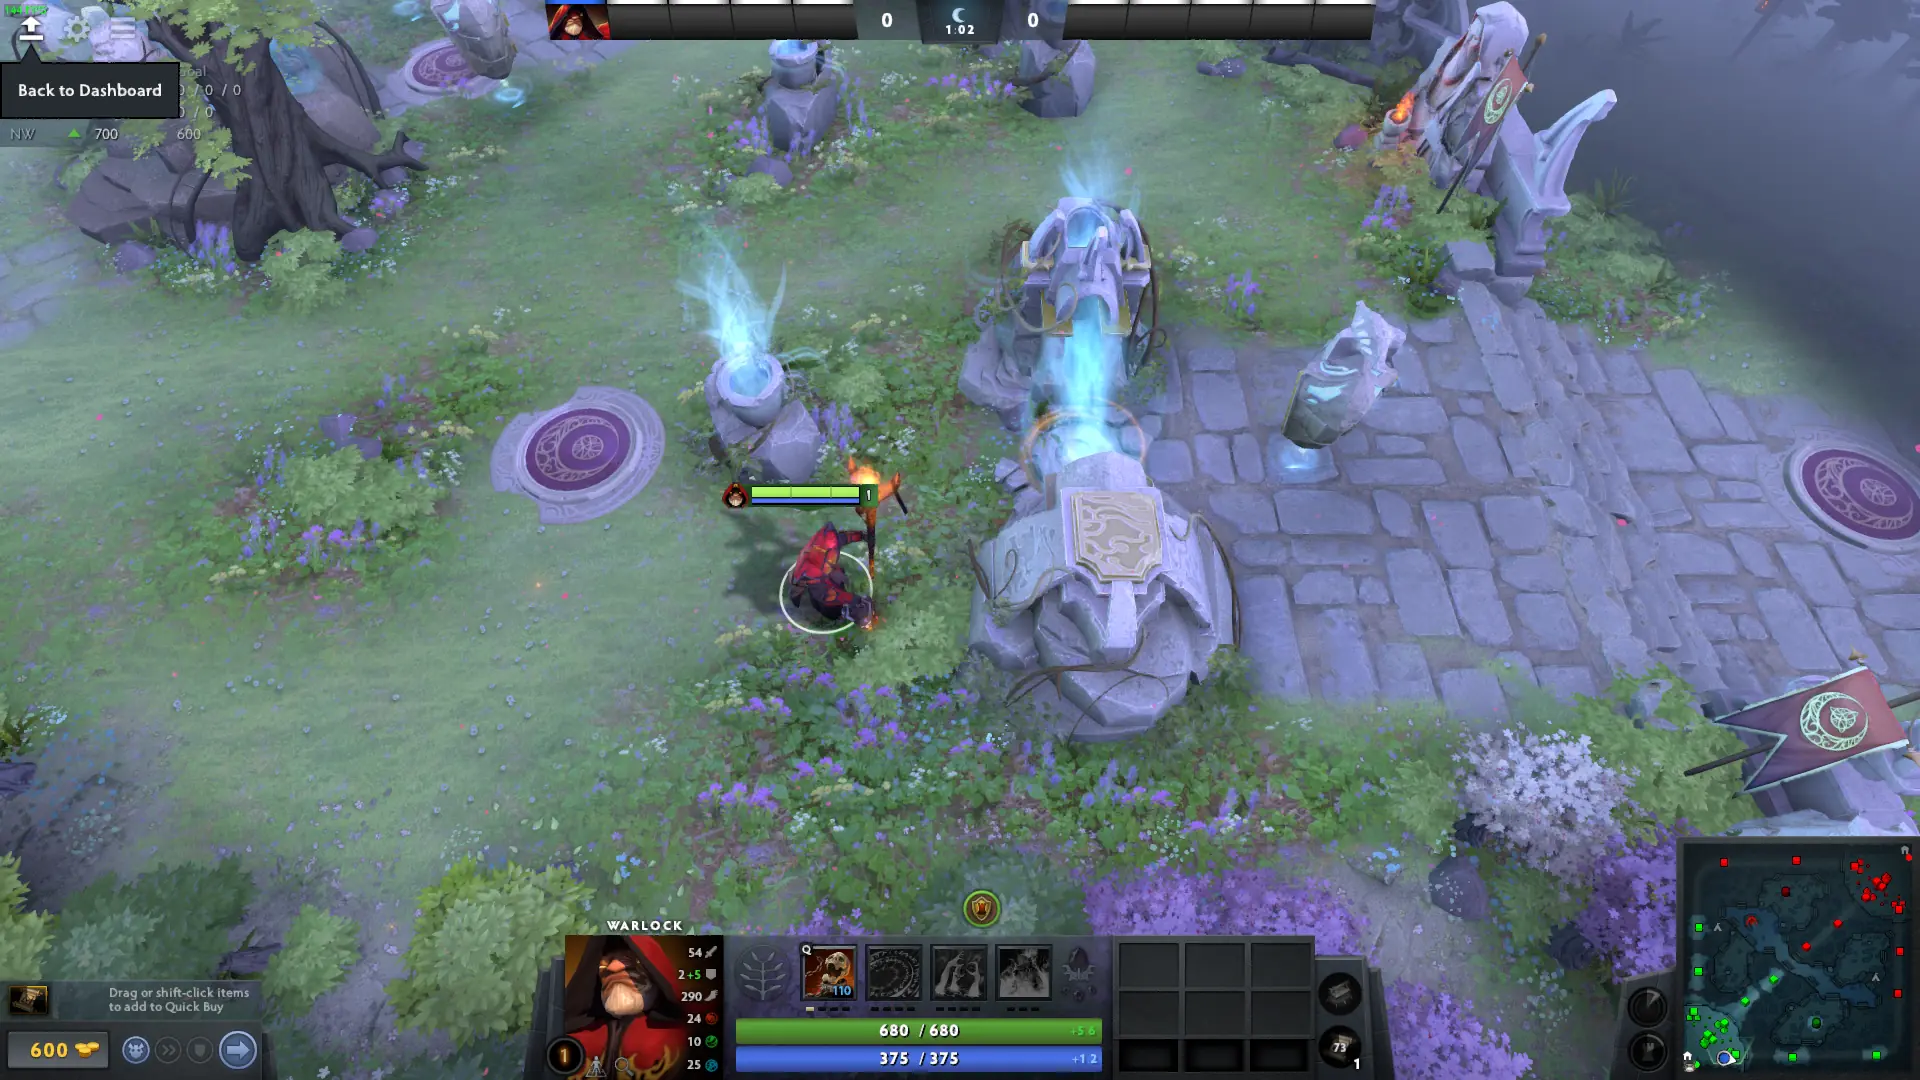 Back to dashboard button in dota 2